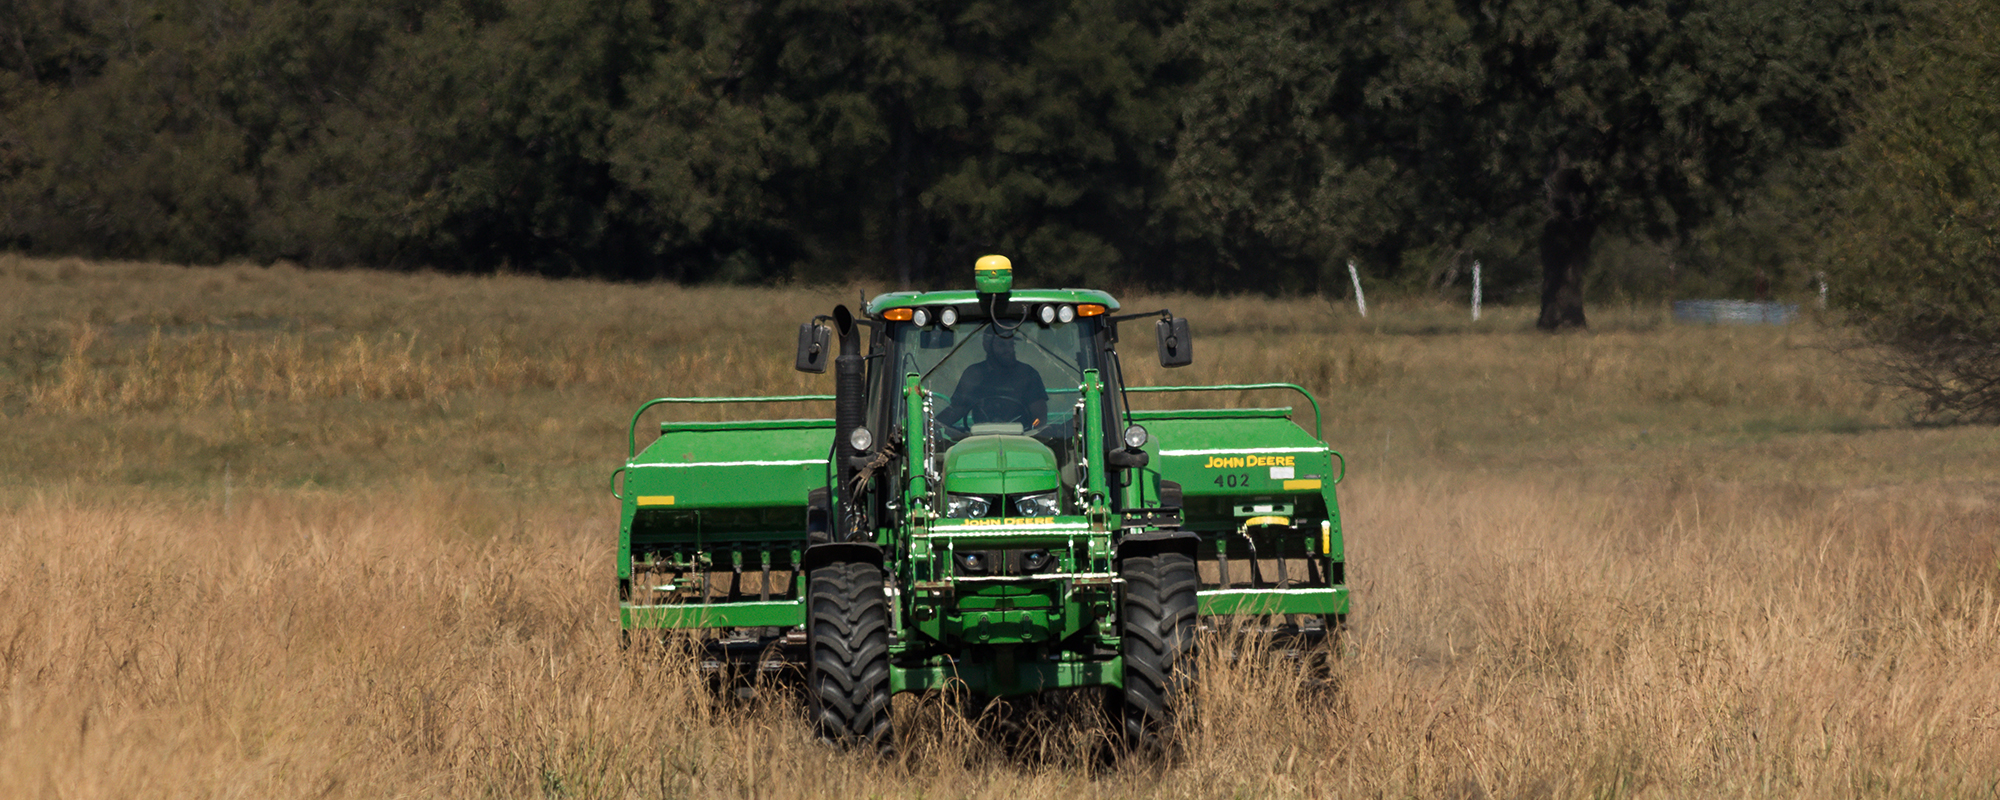 Tips for Overseeding and Improving Pastures in The Fall